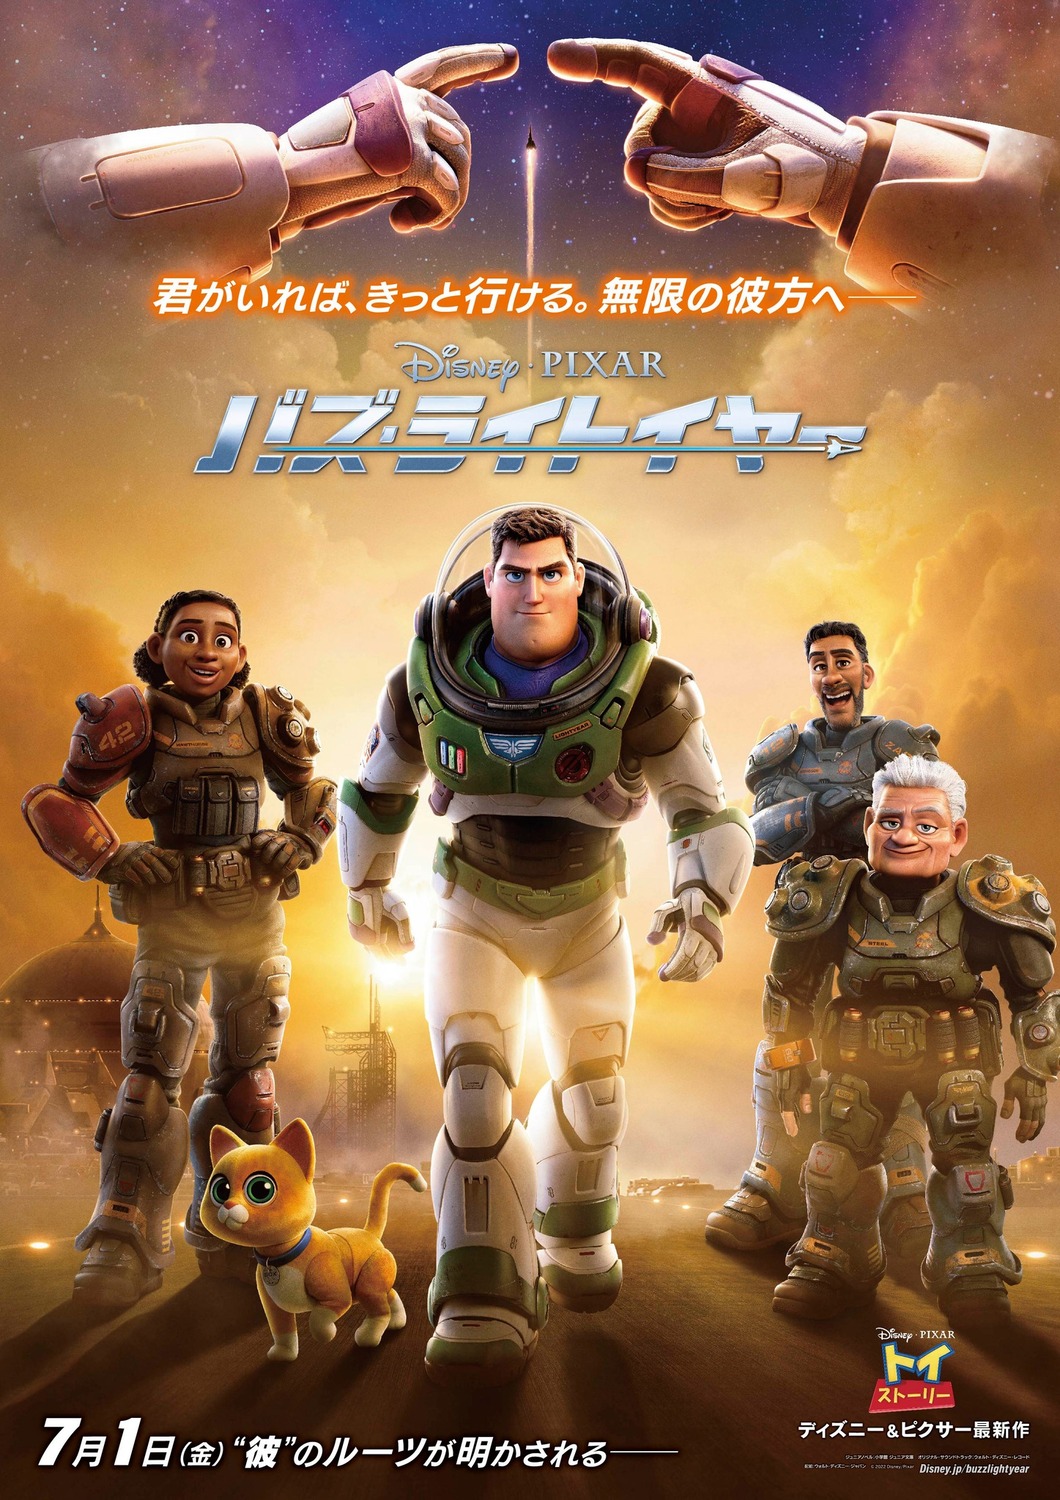 Extra Large Movie Poster Image for Lightyear (#6 of 14)